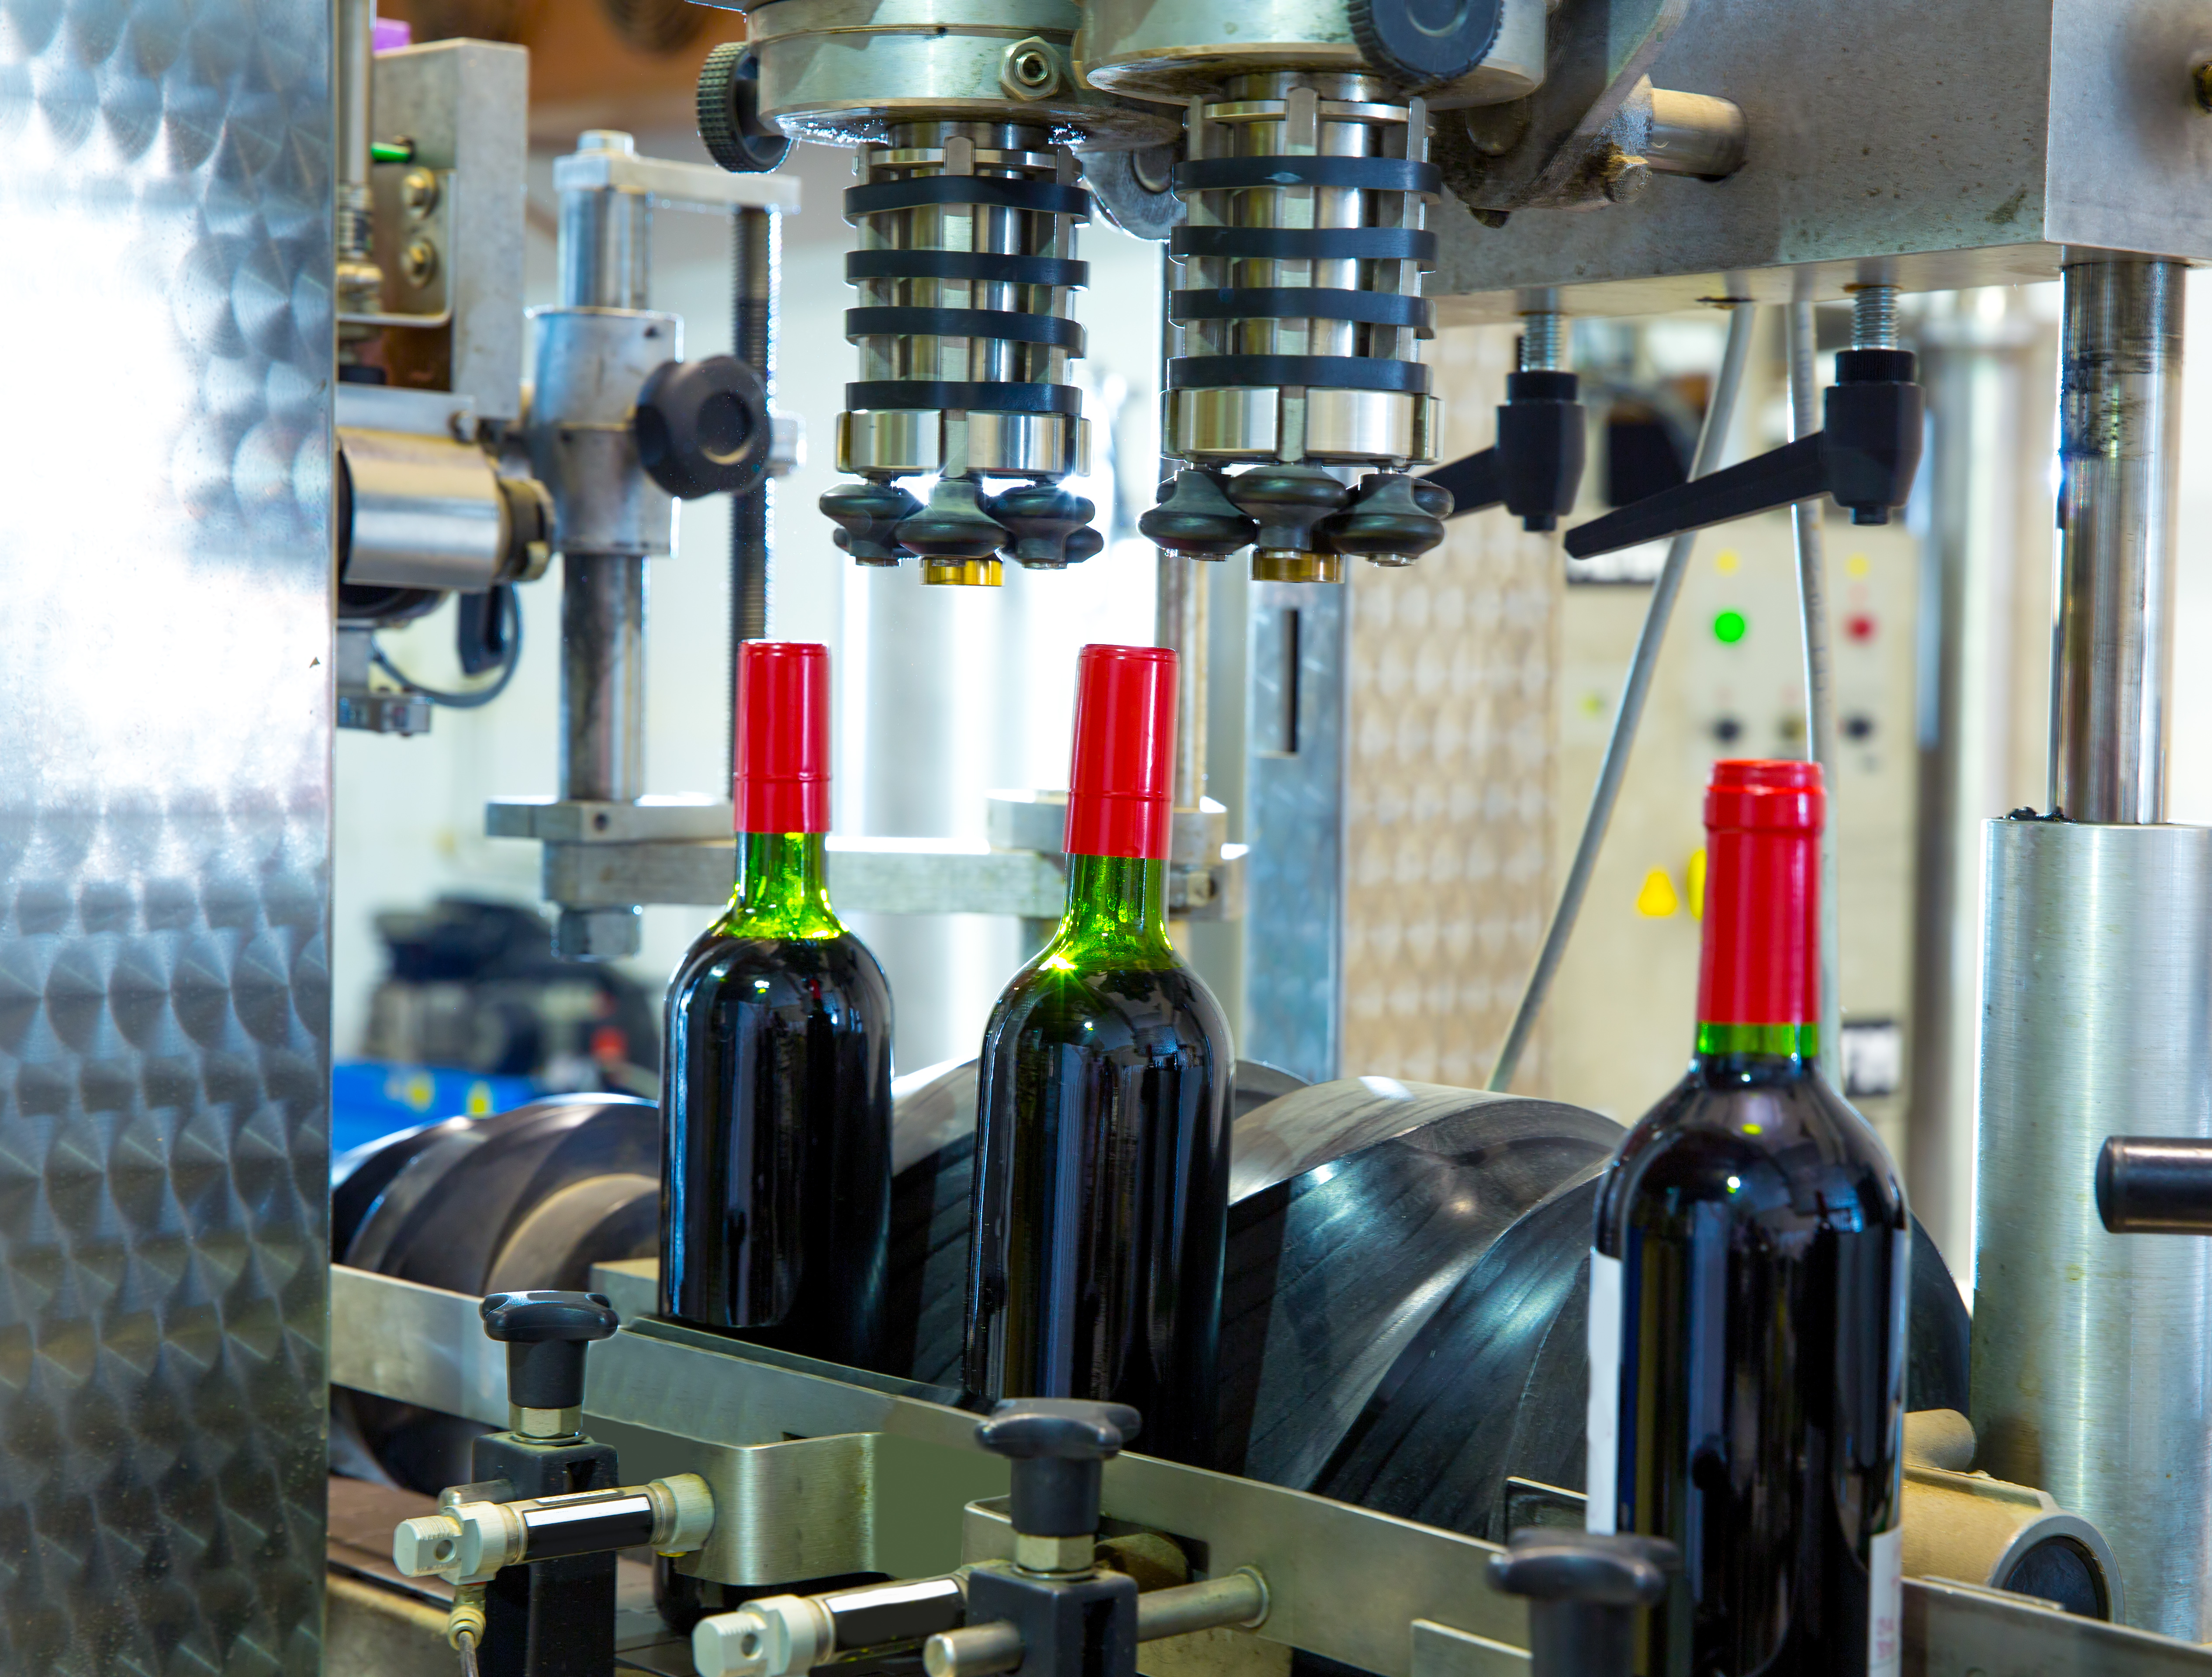 What Can a Tuscan Winery Teach Us About Industry 4.0?